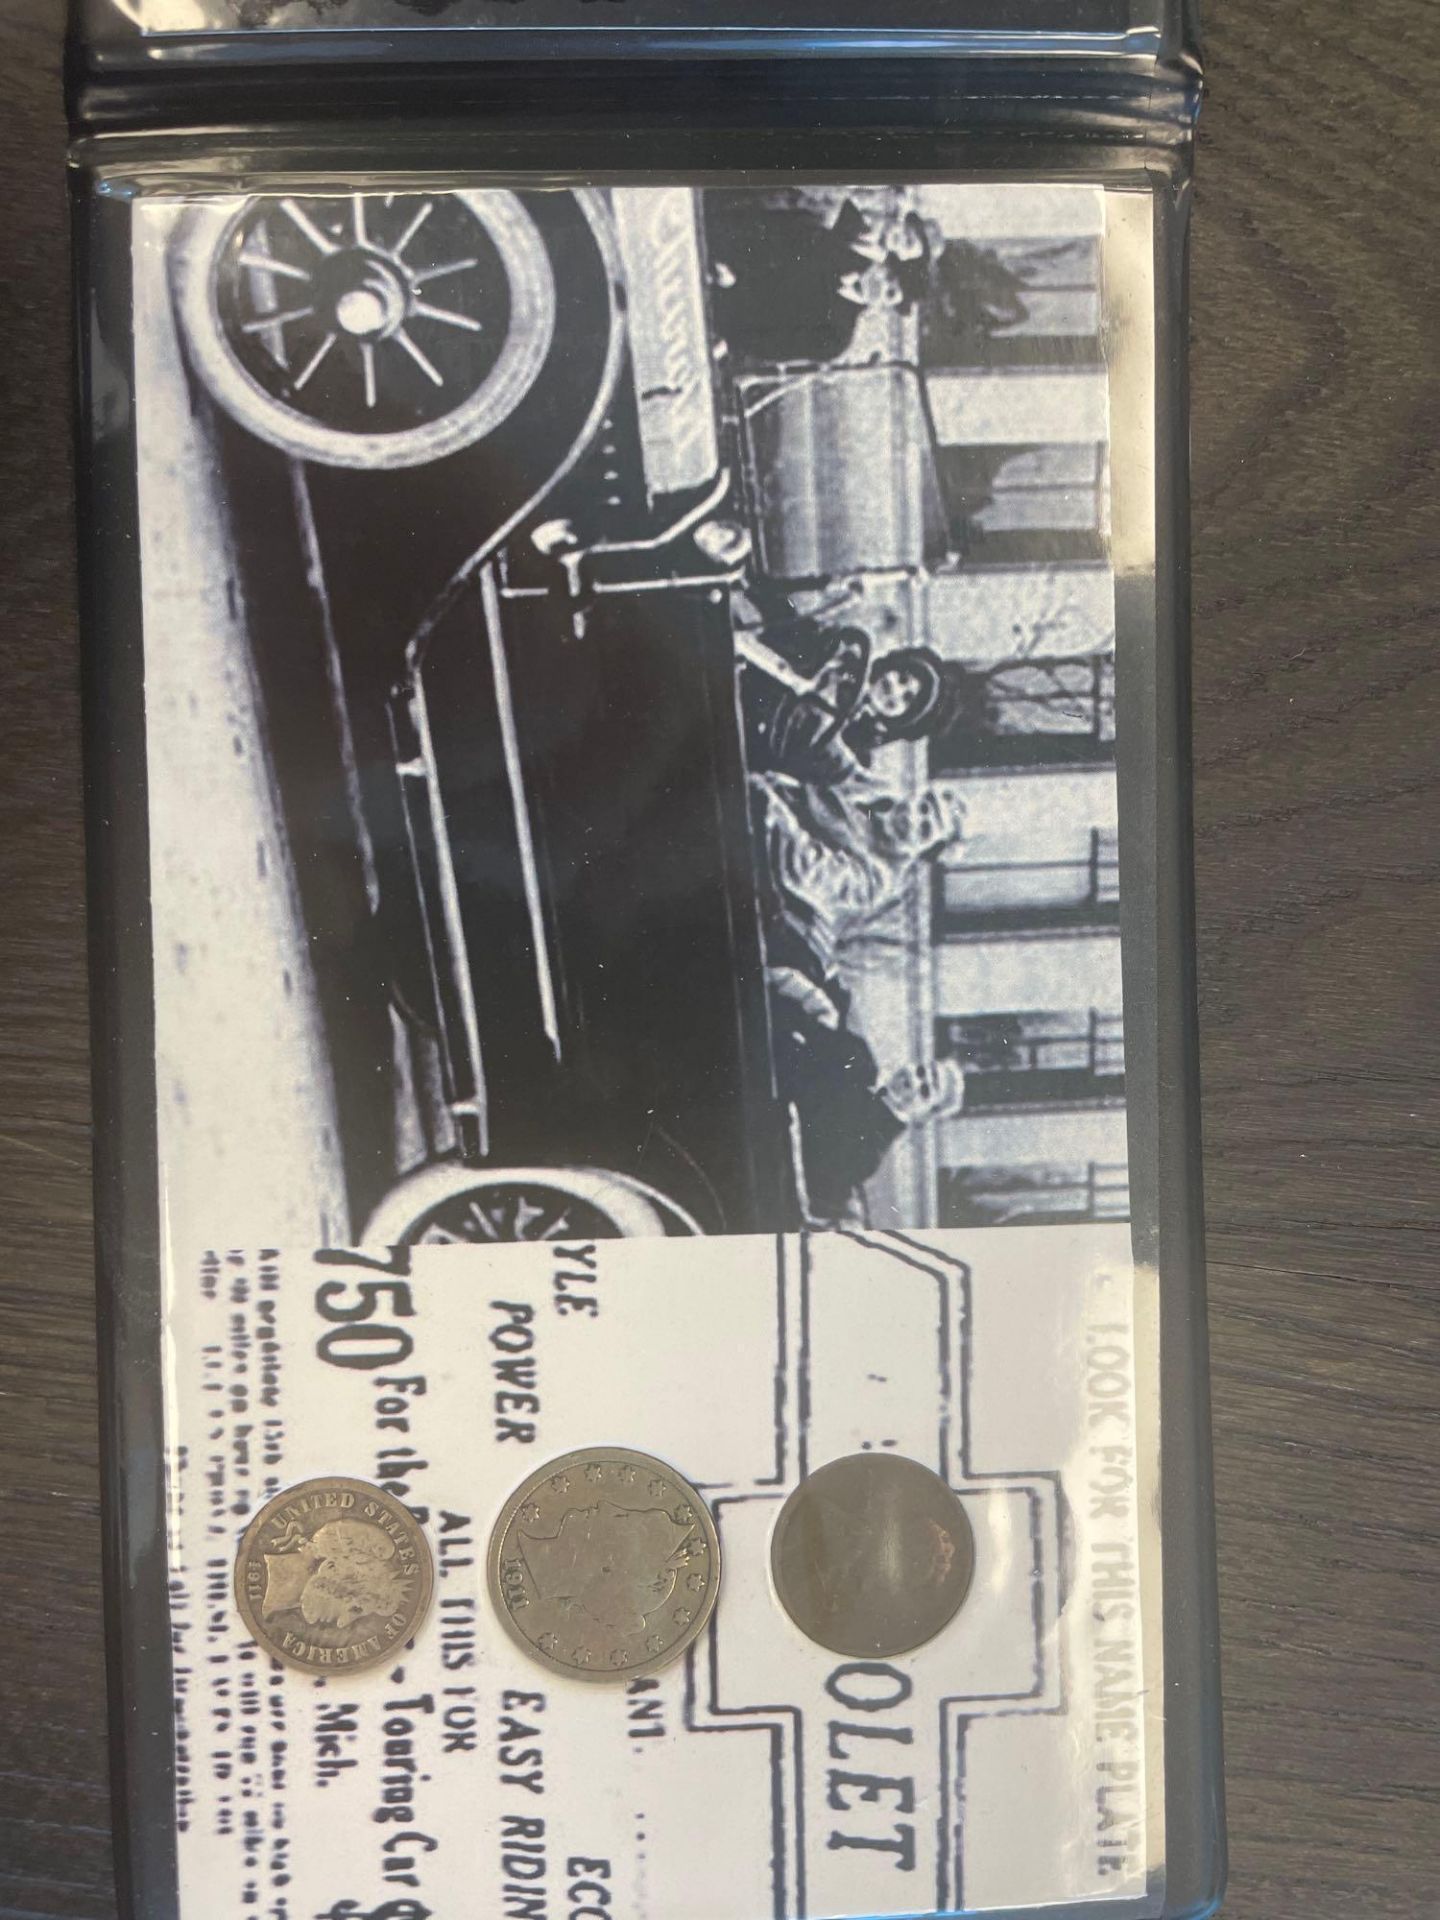 1911 Chevrolet coin set - Image 3 of 6